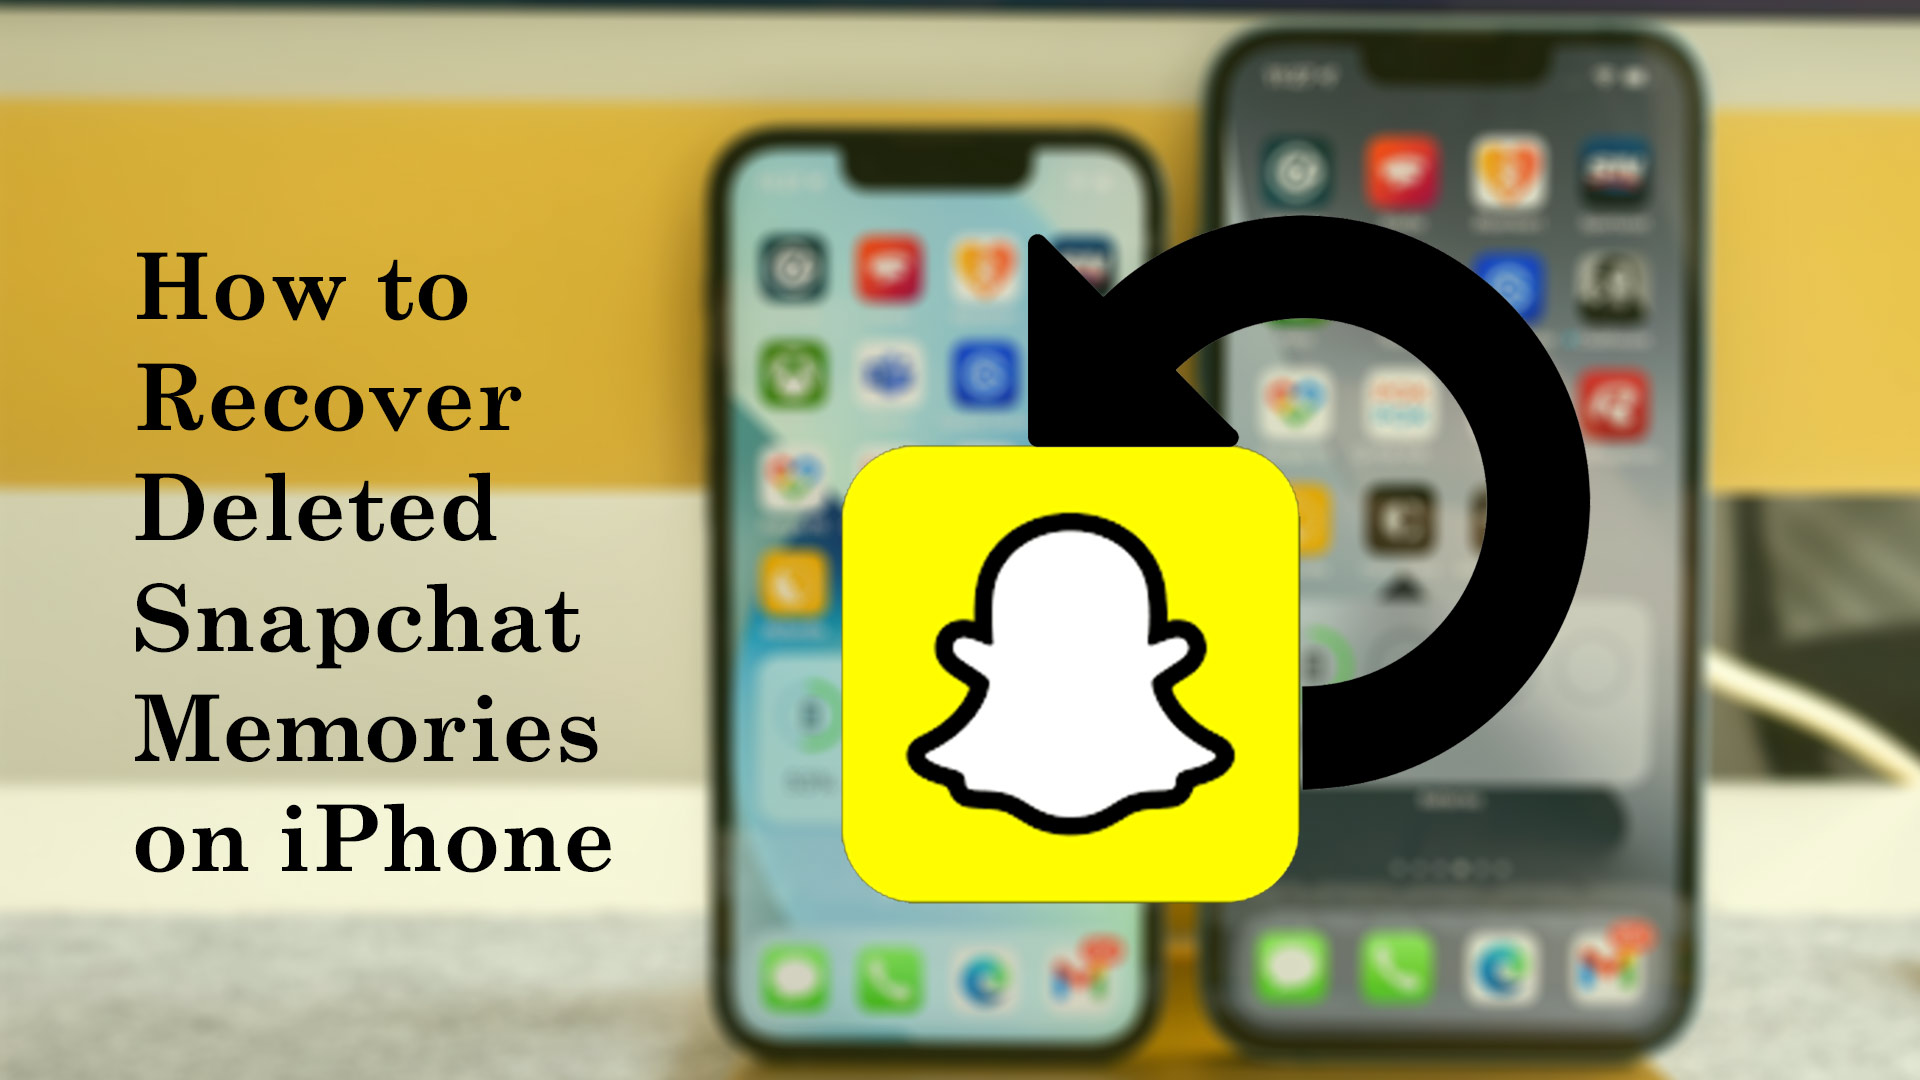 How to recover deleted Snapchat memories on iPhone